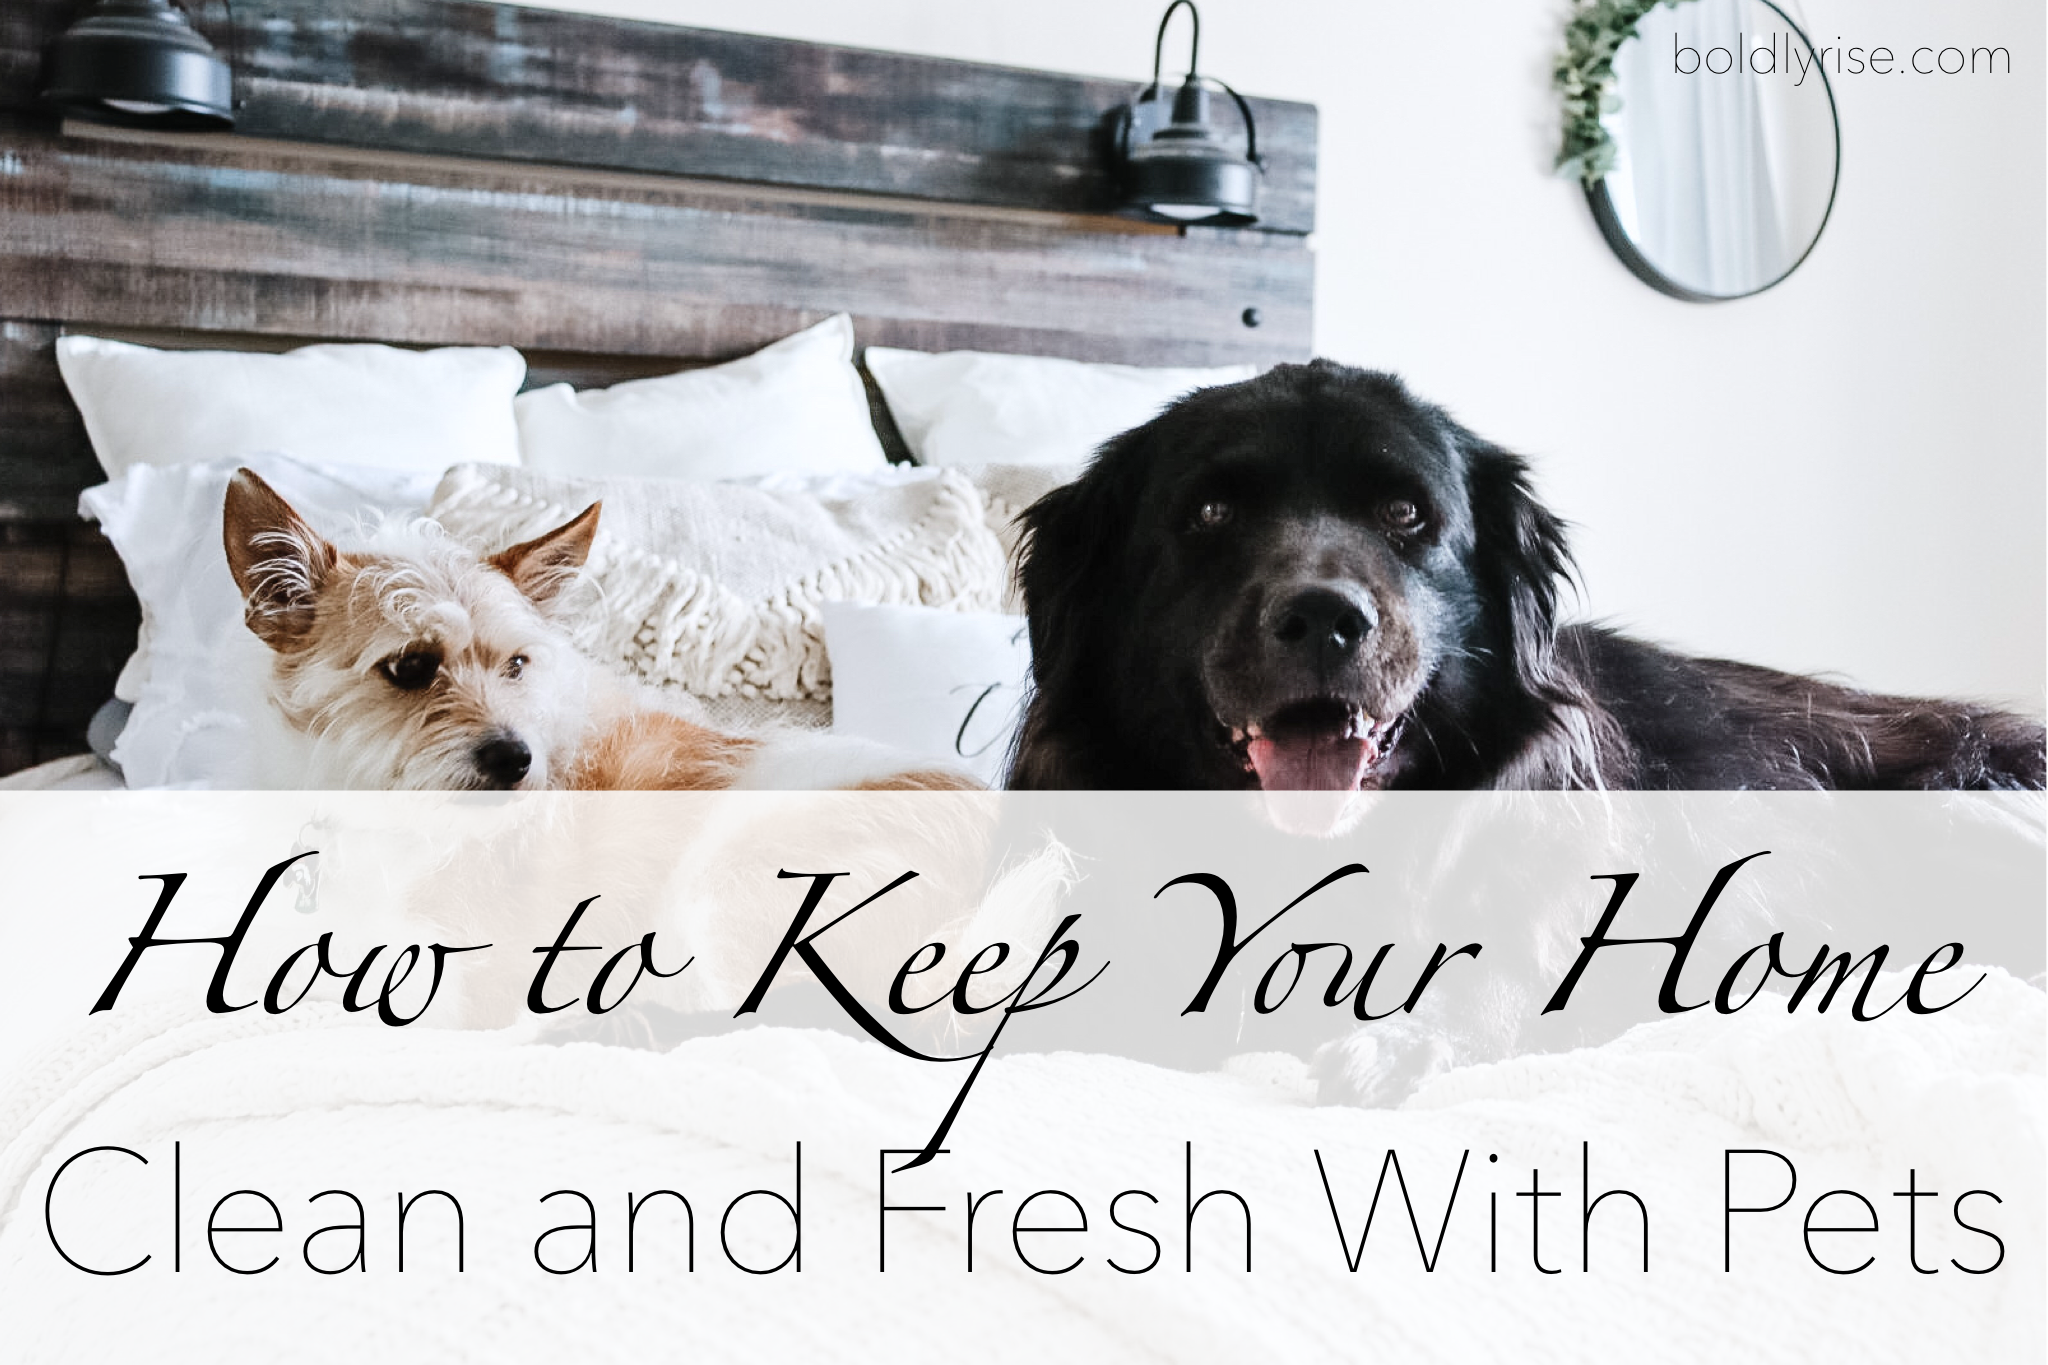 How to Keep Your Home Clean and Fresh With Pets - Boldly Rise